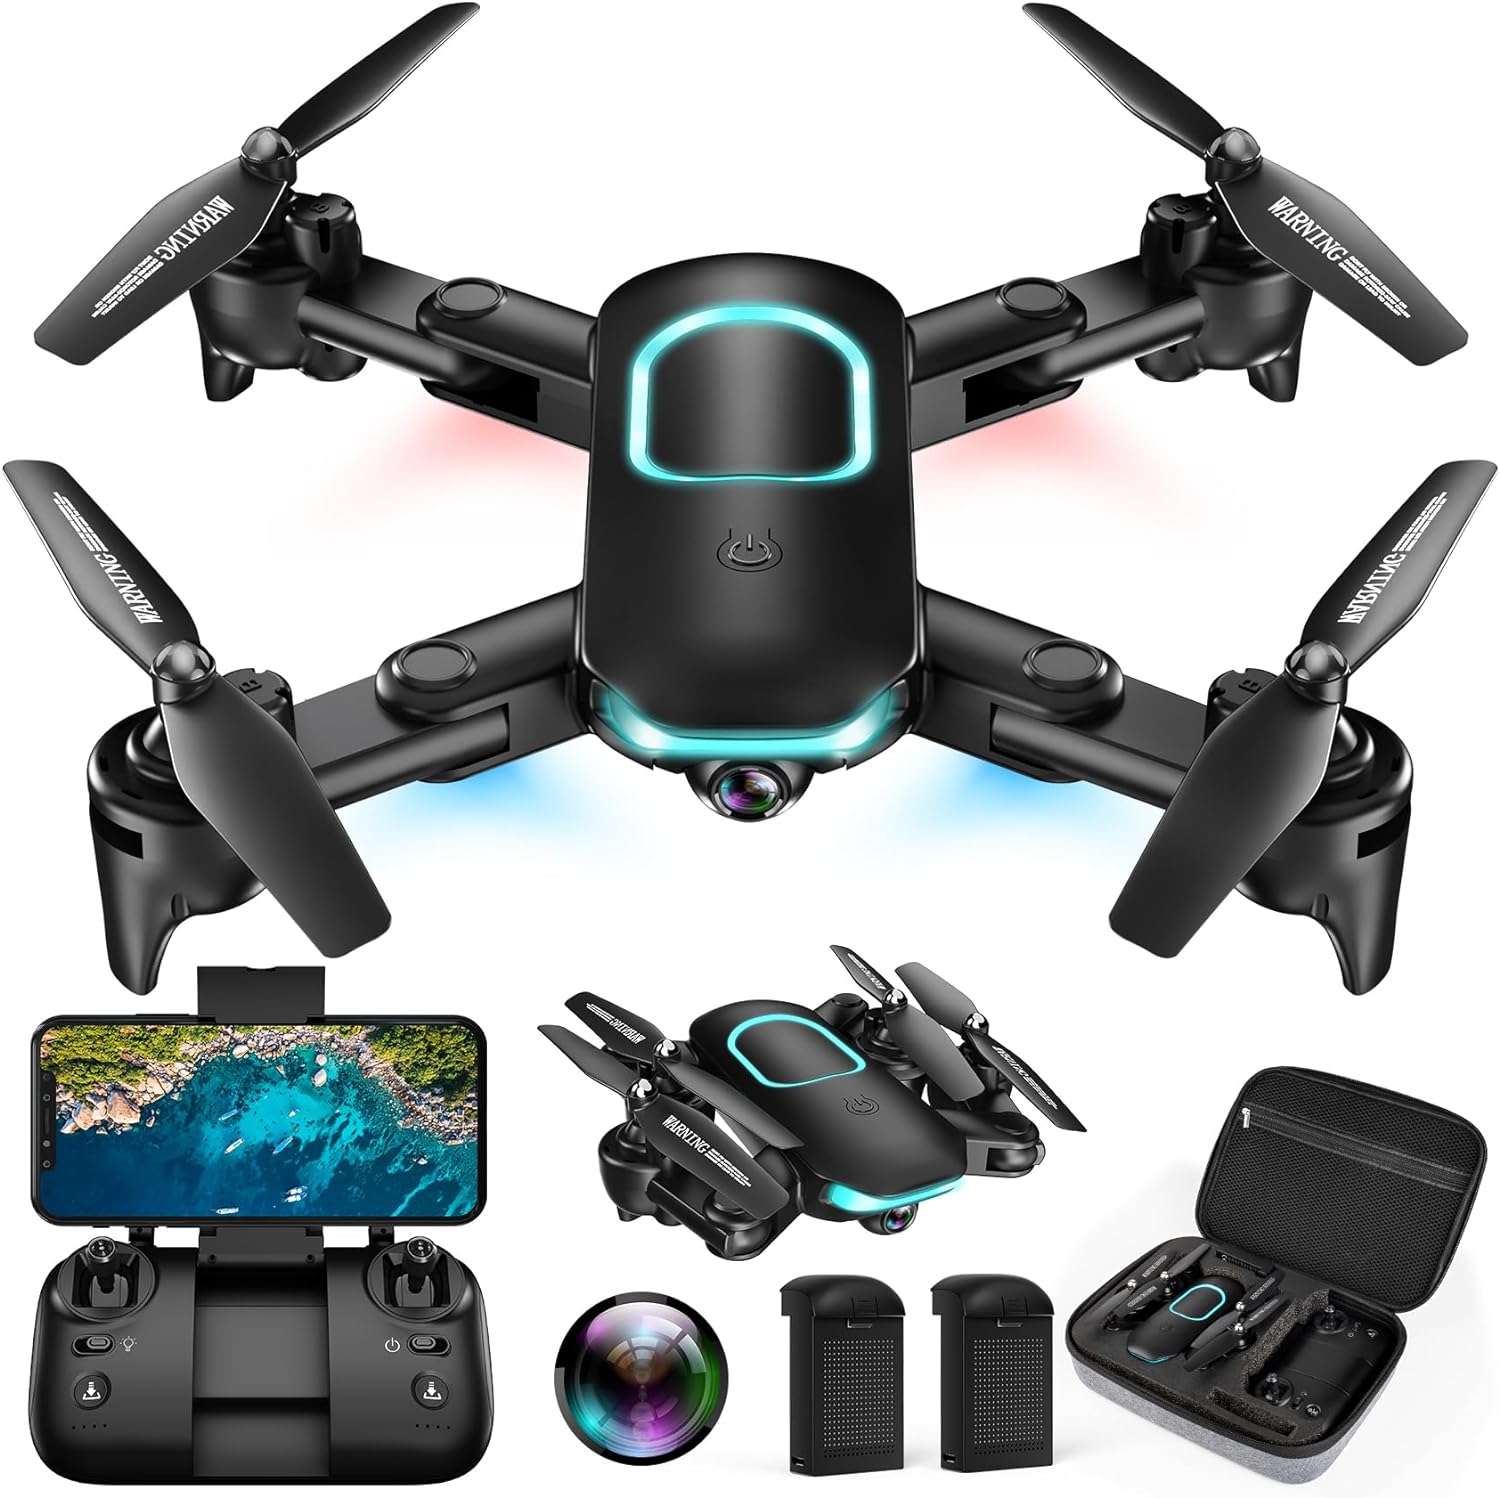 REDRIE Drone with Camera – Foldable Mini Drone for Adults and Kids with 1080P FPV Camera, Upgrade Altitude Hold, Gestures Selfie, Waypoint Fly, Headless Mode, 3D Flip, One Key Start, 3 Speed Mode, Circle Fly, 2 Batteries